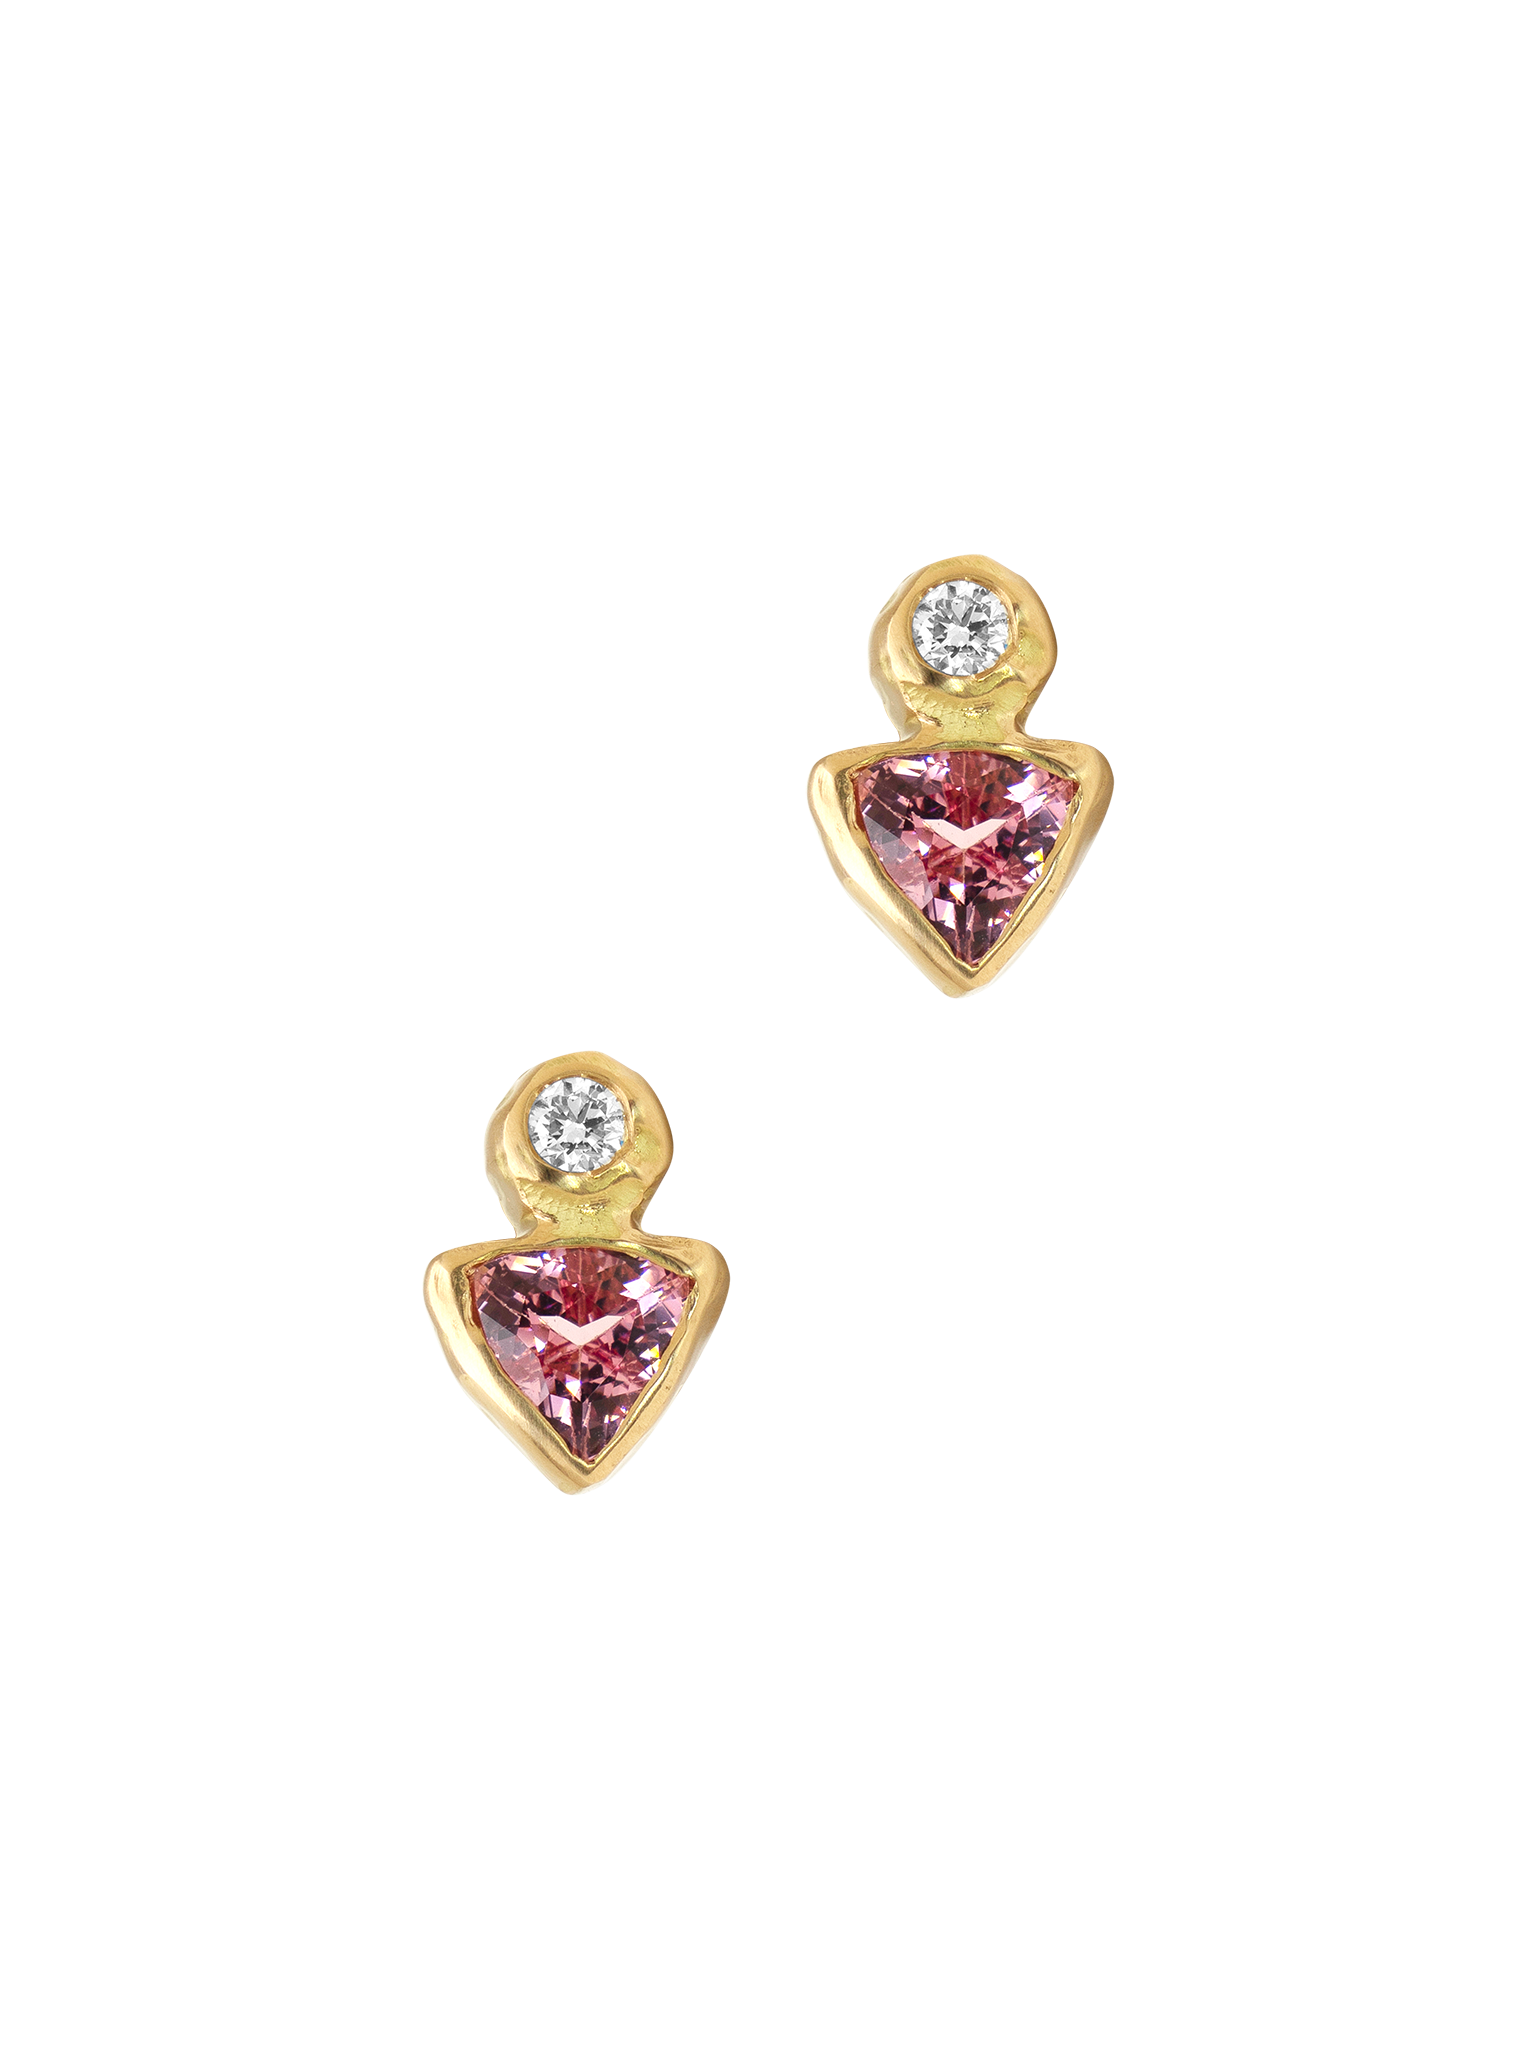 Pure spinel and diamond studs